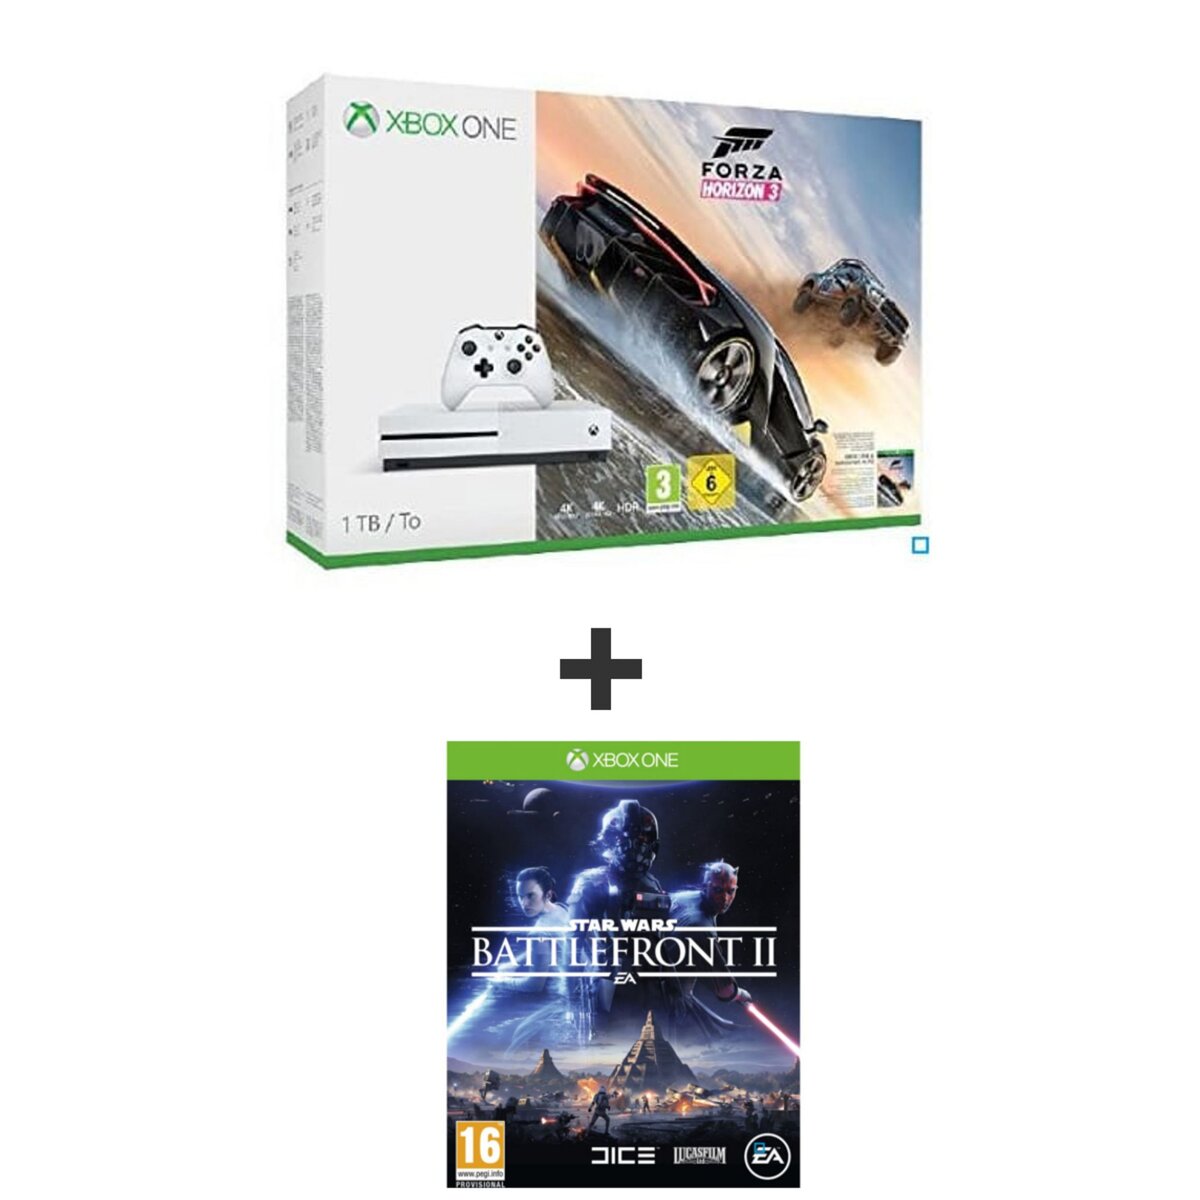  Console Xbox One S 1To + Forza Horizon 3 + Star Wars Battlefront II